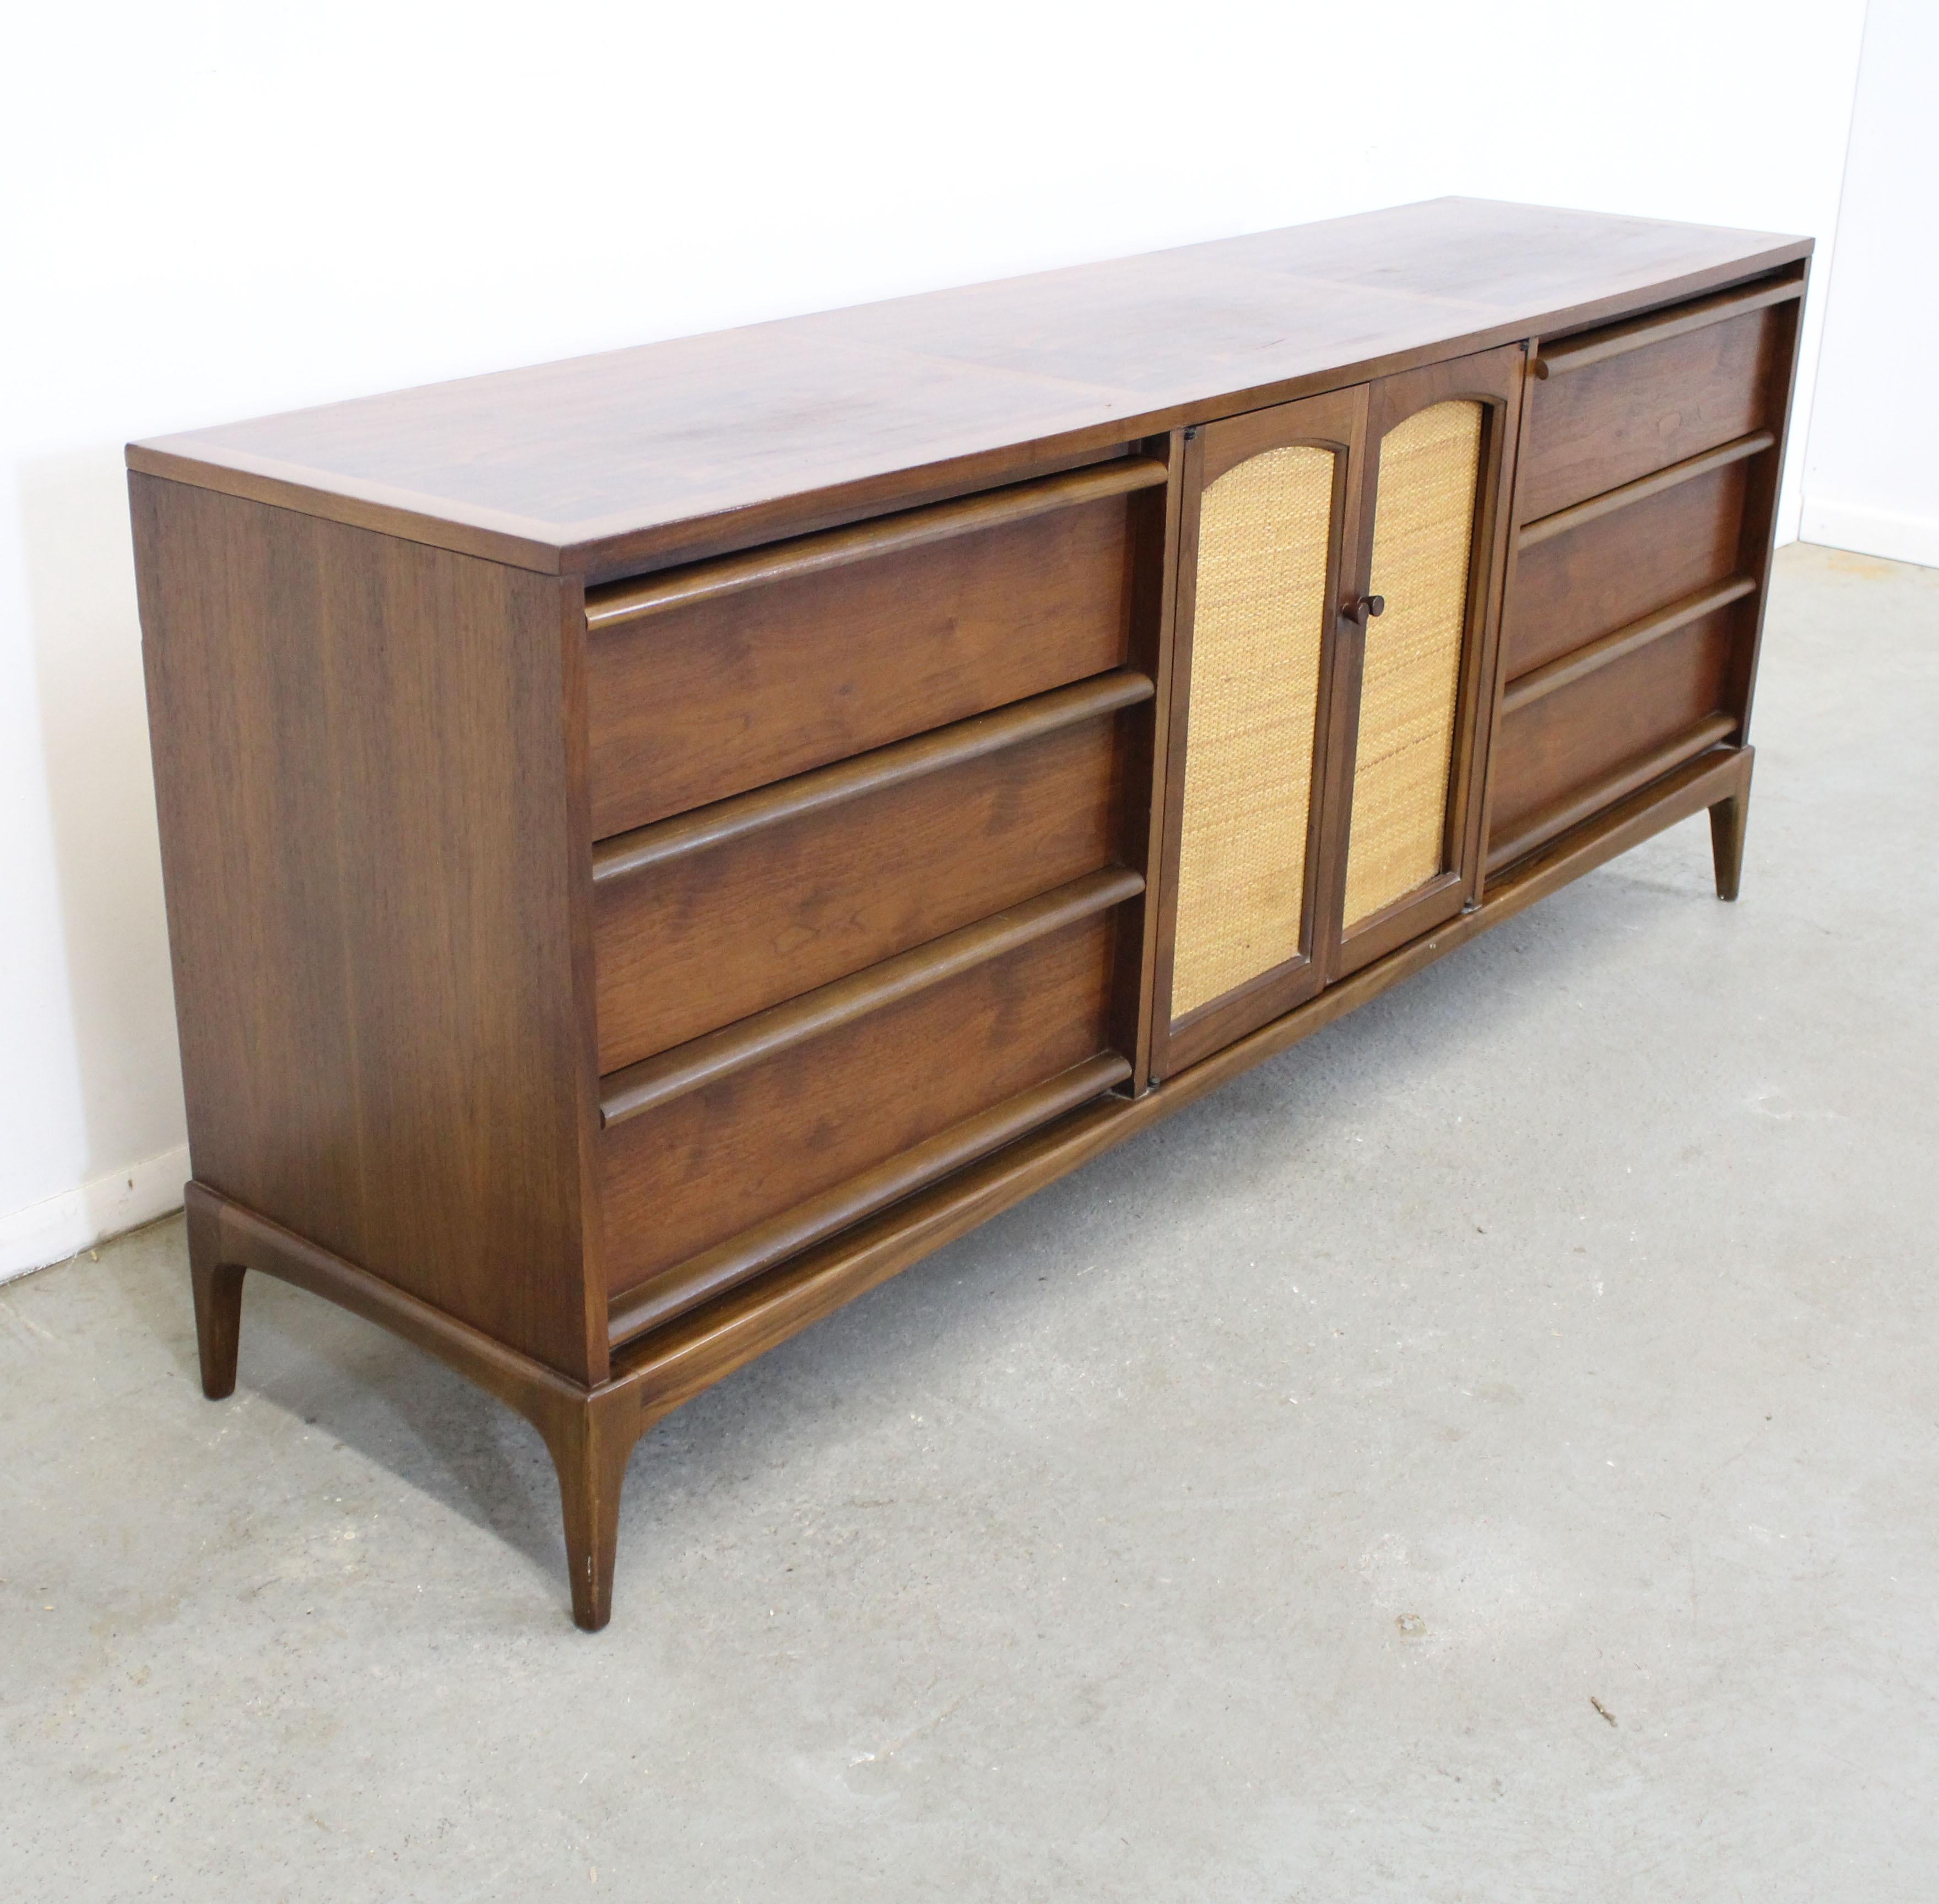 Offered is vintage Mid-Century Modern walnut dresser/credenza by Lane 'Rhythm', circa 1960. This beauty features a beautiful walnut grain, parqueted top, and two centered cane doors with three hidden drawers and 6 side drawers. The doors are